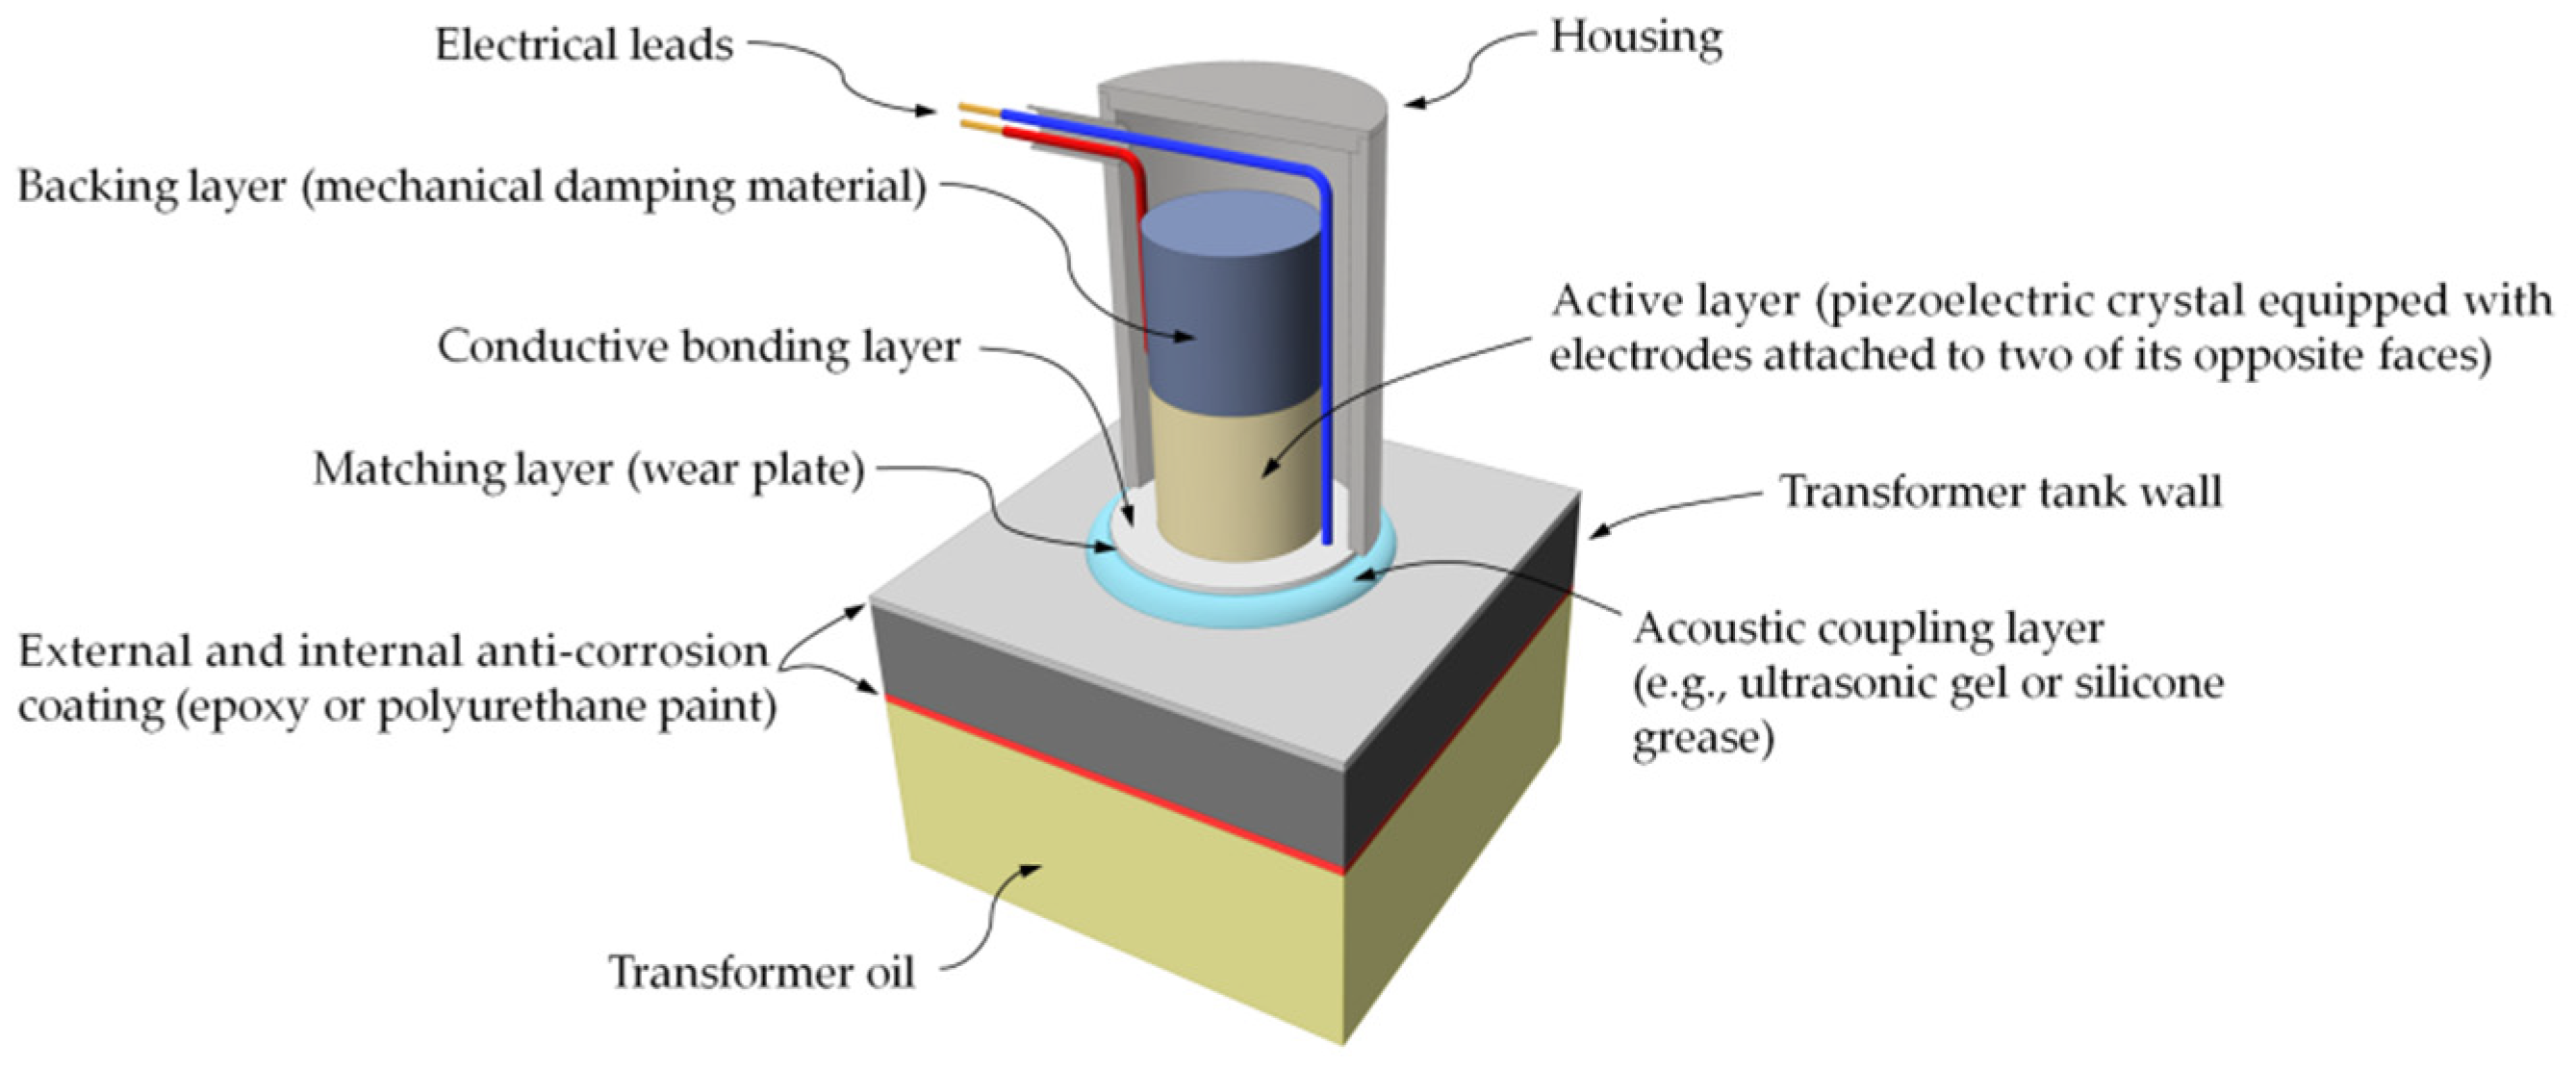 Energies Free Full Text Active Dielectric Window A New Concept Of Combined Acoustic Emission And Electromagnetic Partial Discharge Detector For Power Transformers Html